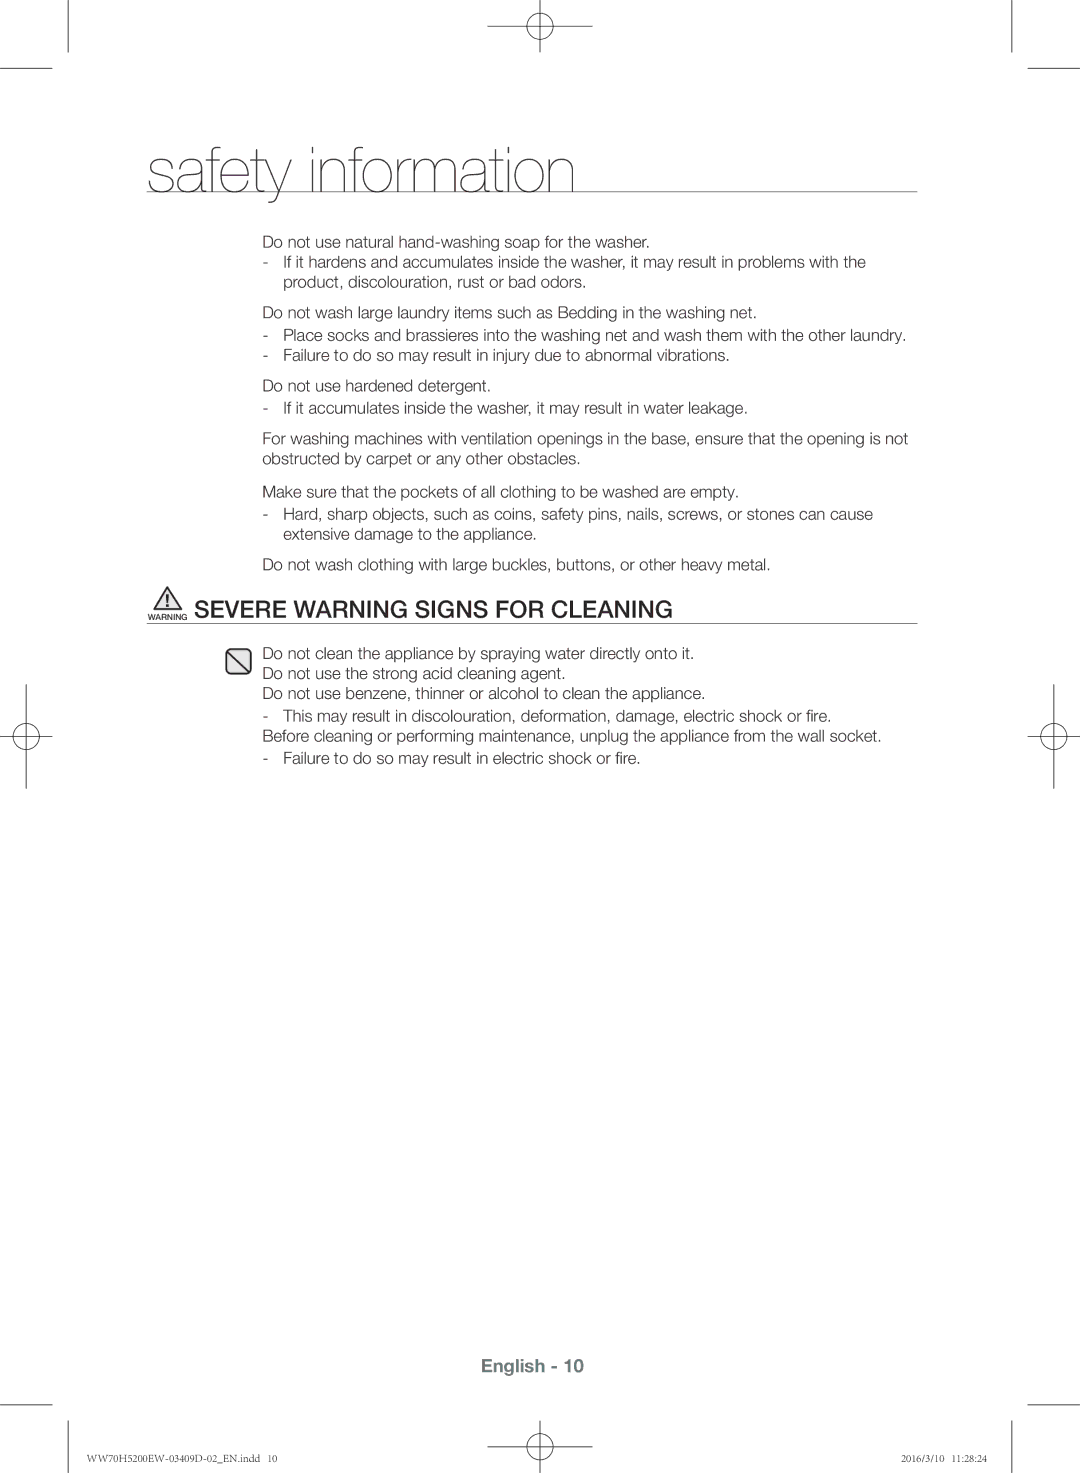 Samsung WW70H5200EW/KJ manual Failure to do so may result in electric shock or fire 